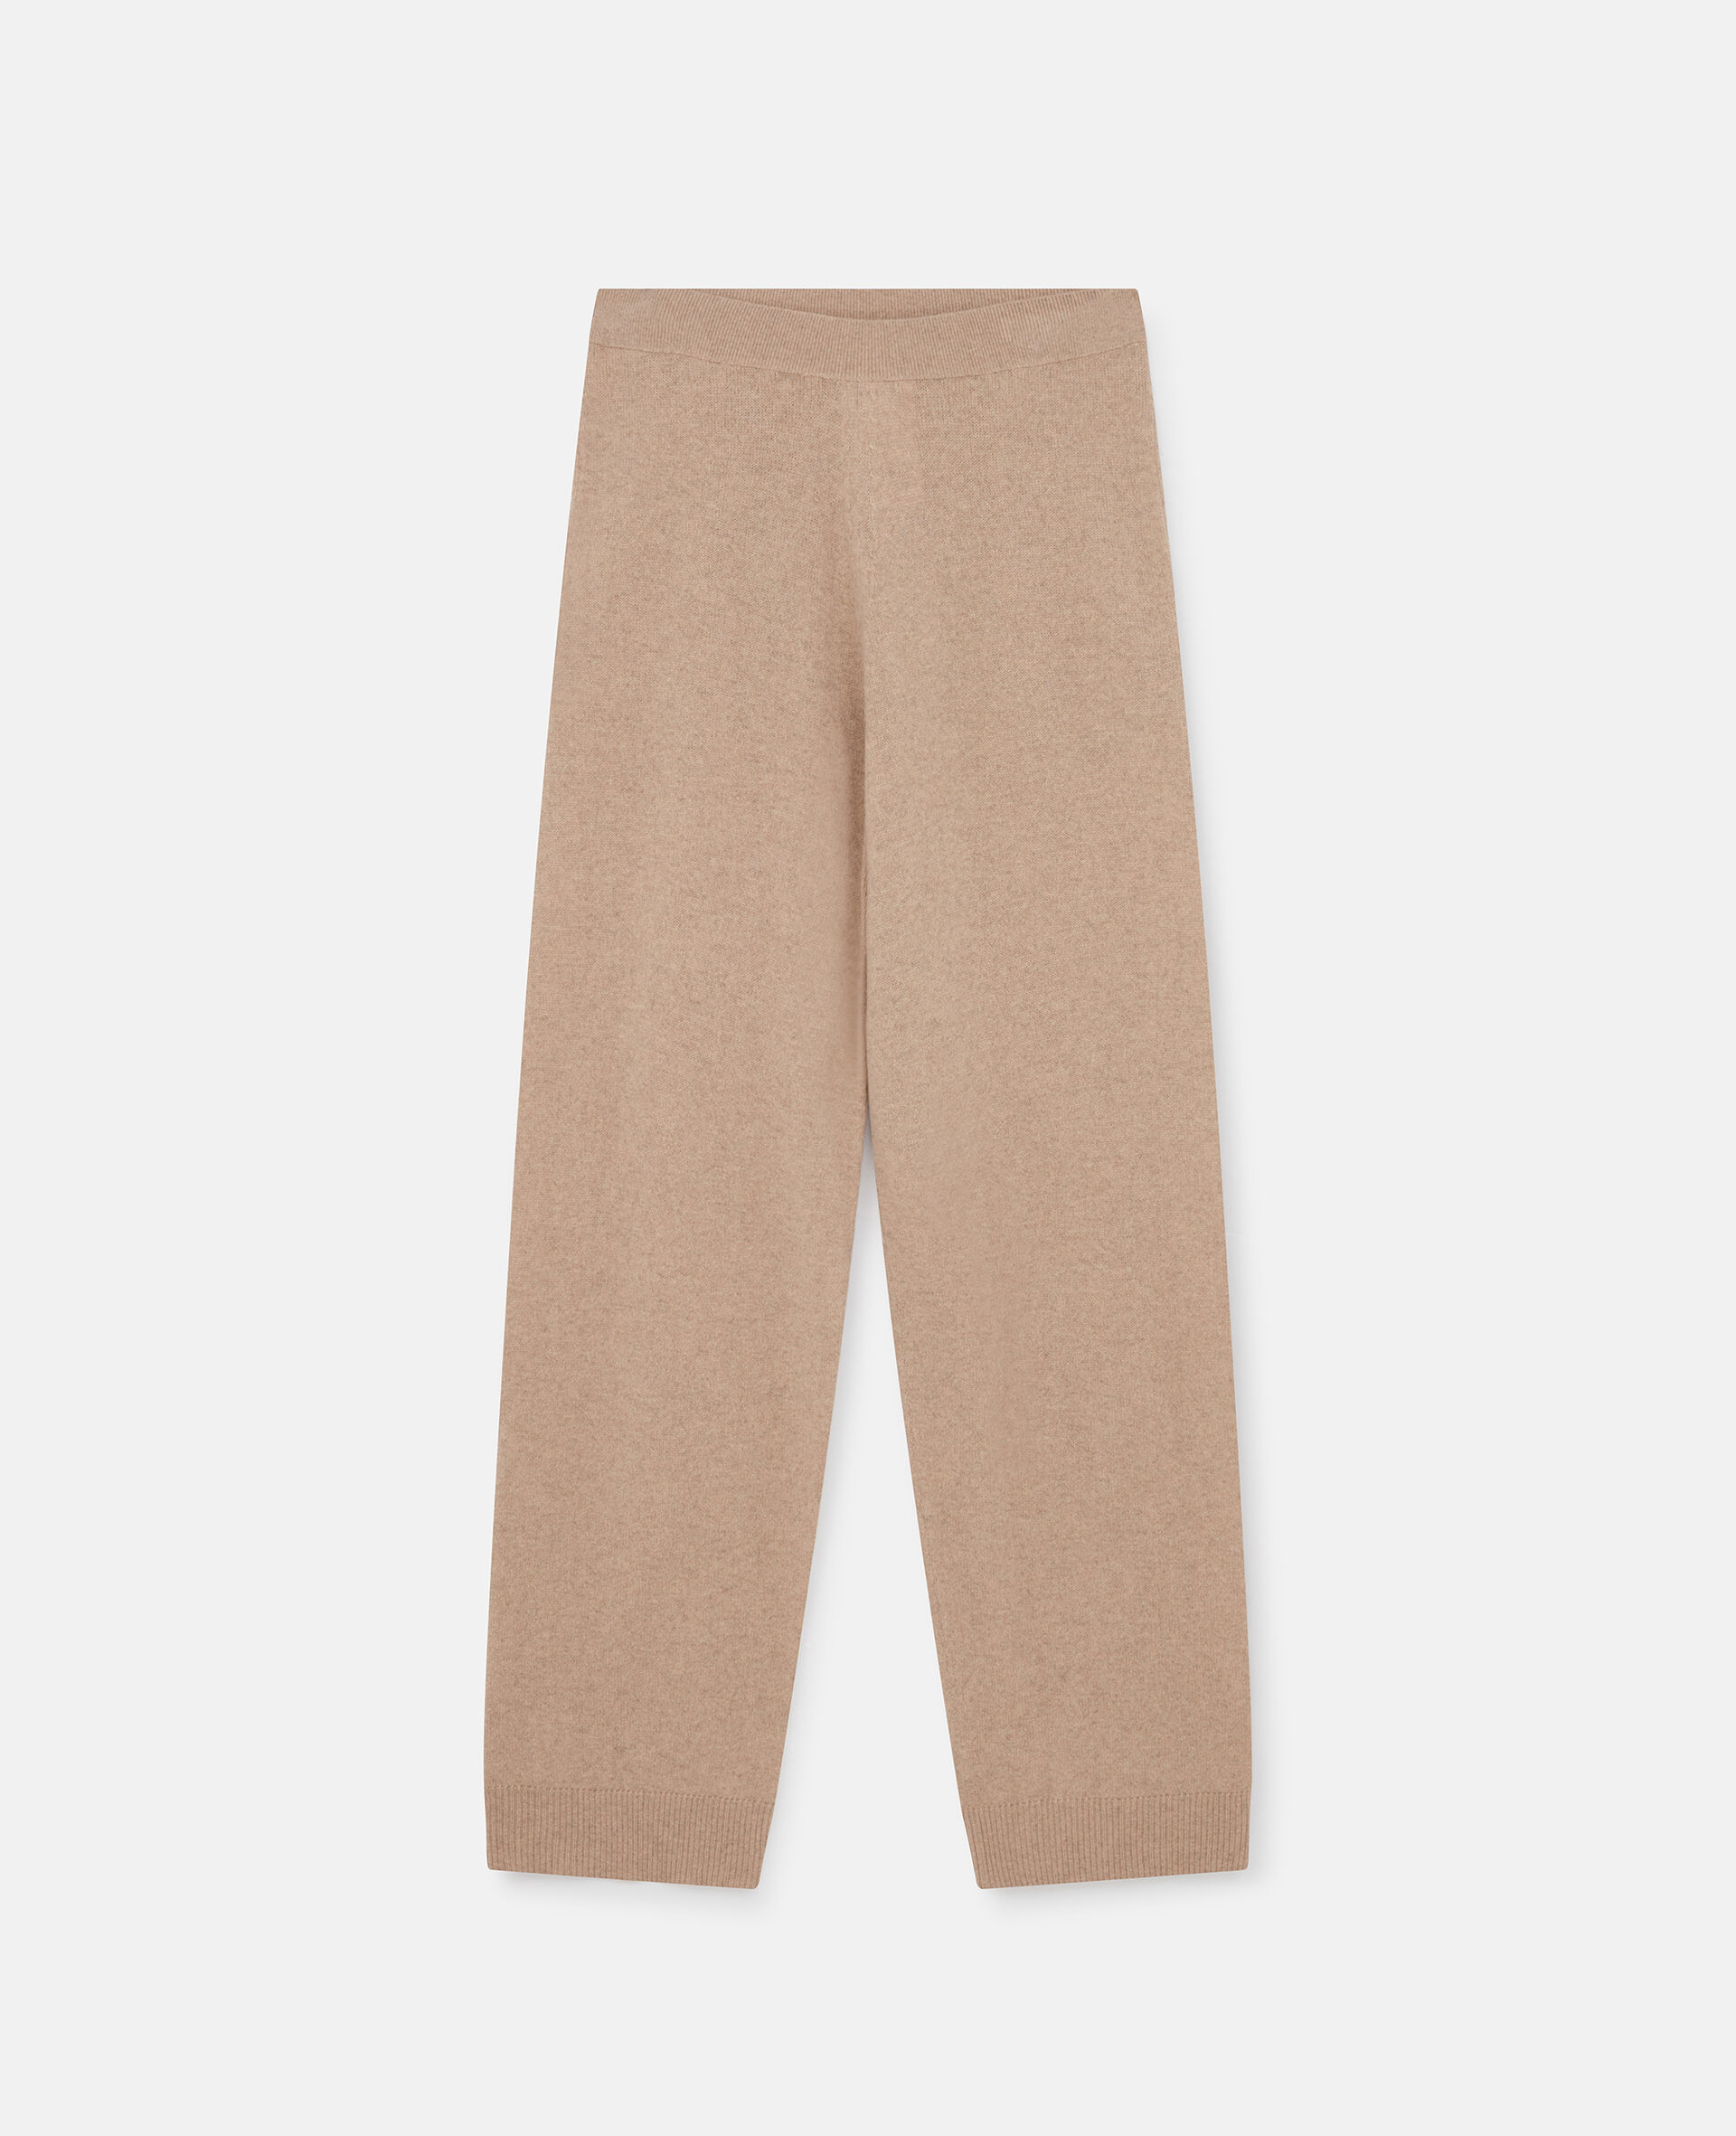 High Rise Straight Leg Pants-Beige-large image number 0